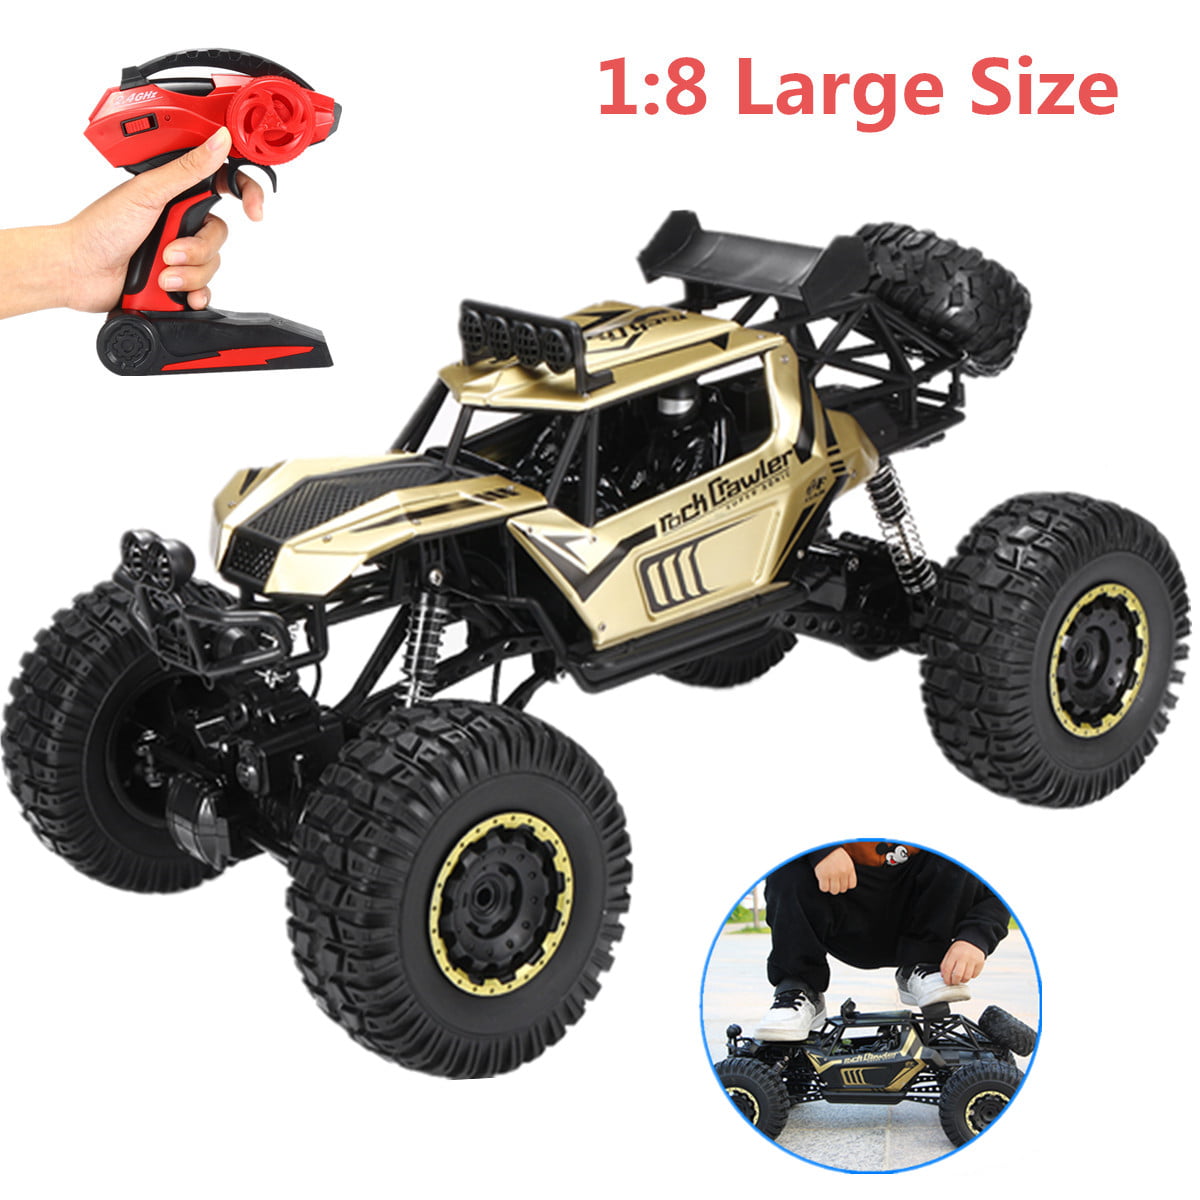 [Large Size 1:8] 4WD RC Car Monster Truck Rock Crawlers 2.4G Radio Remote Control High Speed Off-Road Vehicle Powerful Motor for Kids Gift Toy